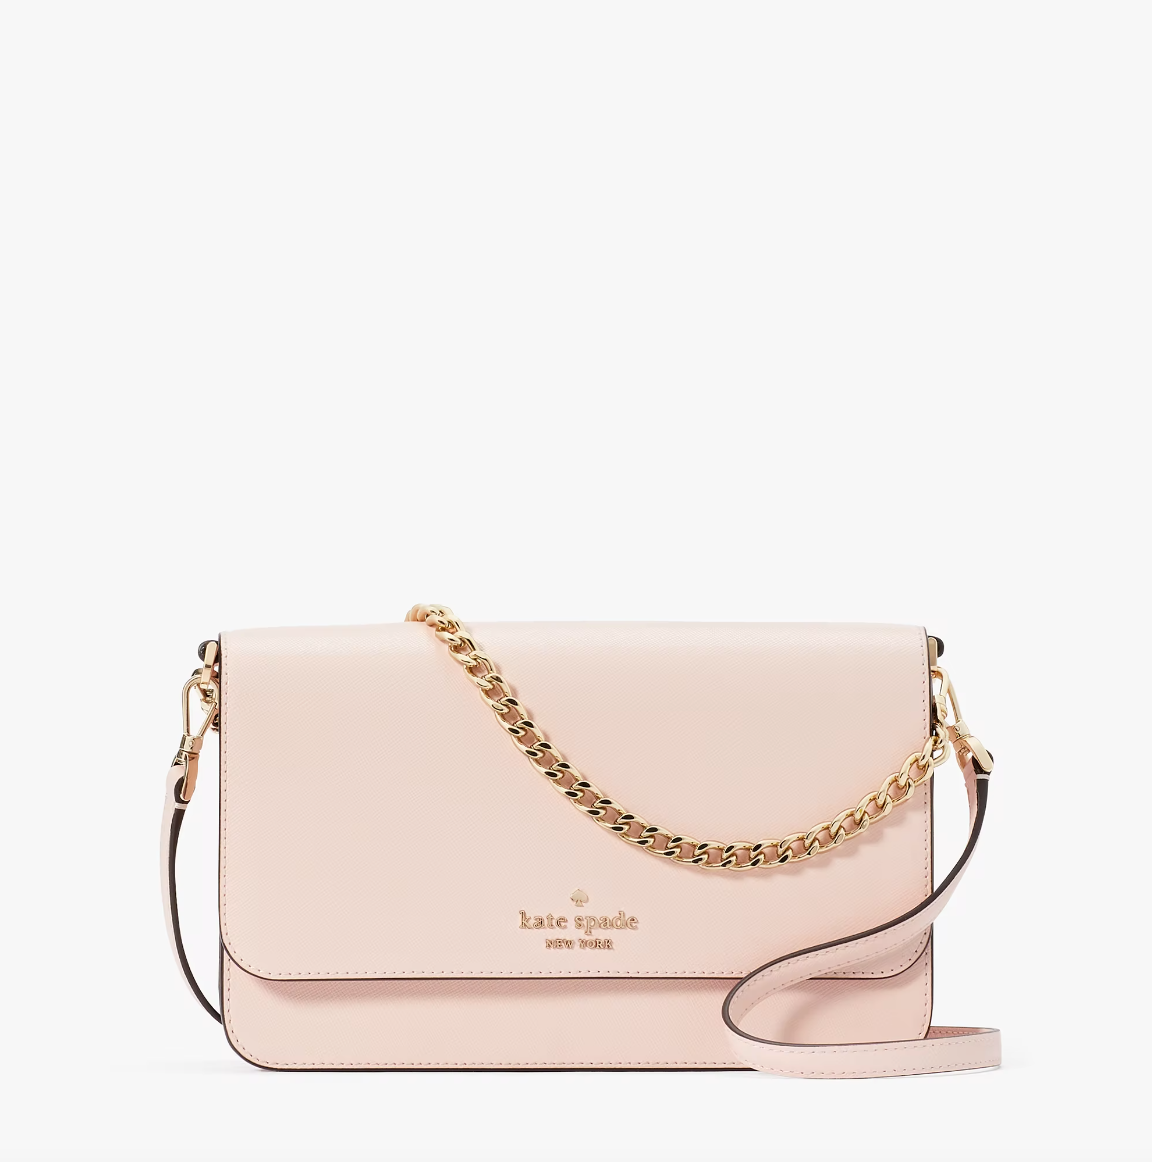 Load image into Gallery viewer, Kate Spade Madison Flap Convertible Crossbody In Conch Pink (Pre-Order)
